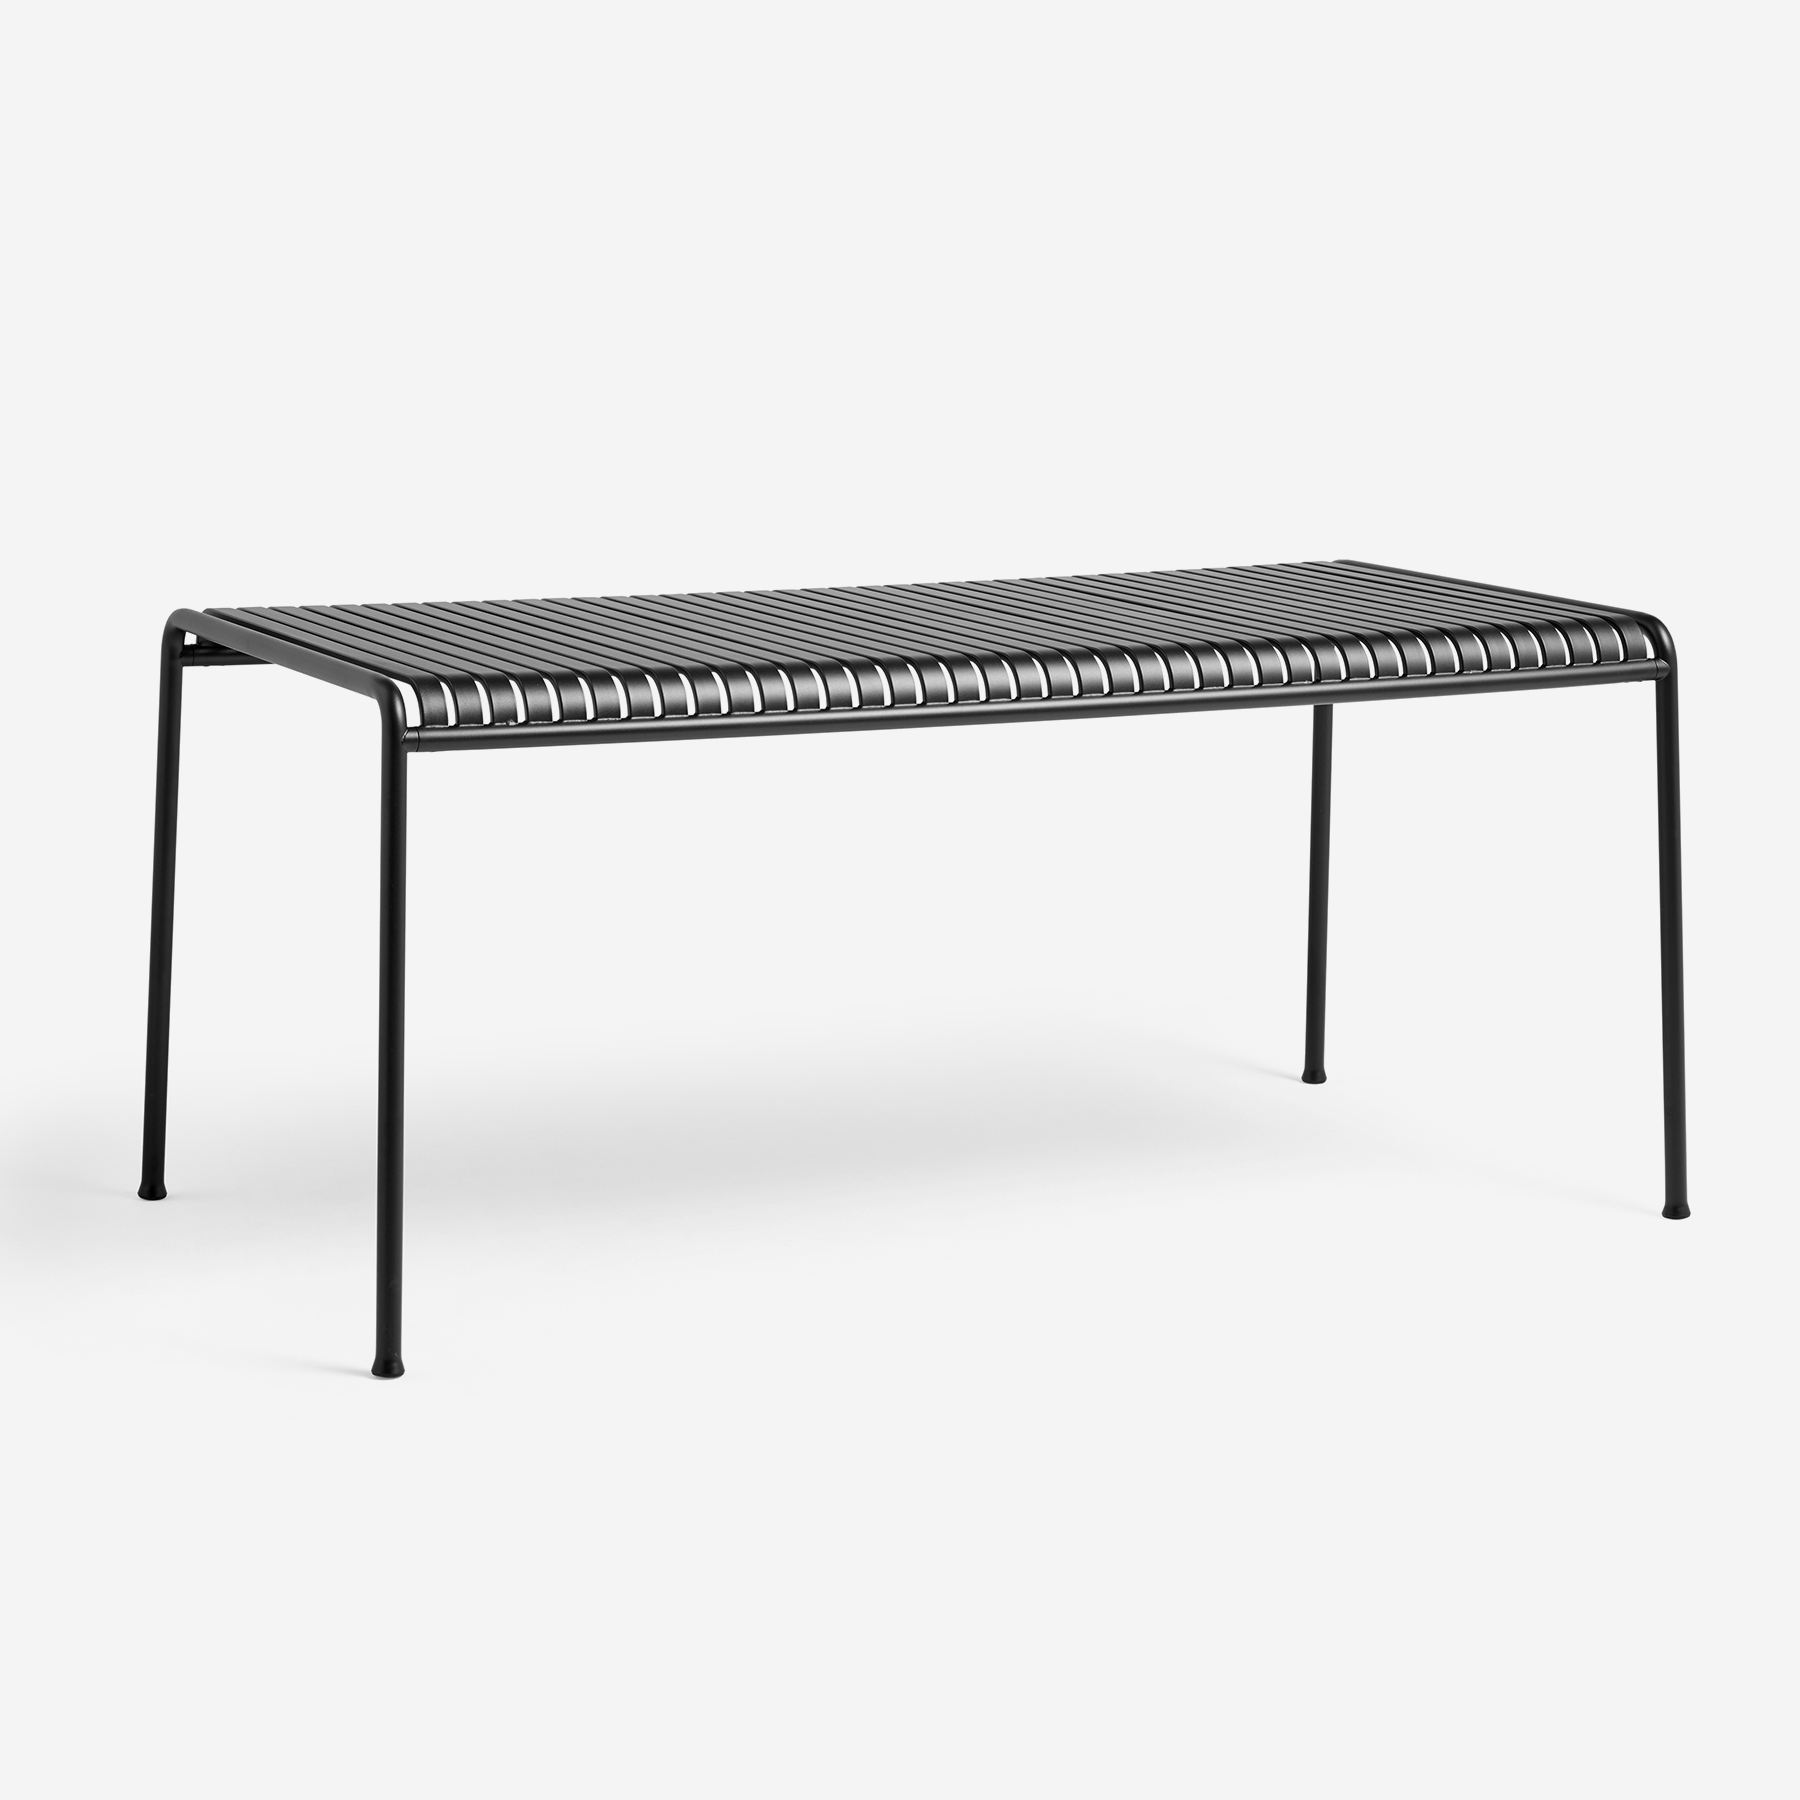 Palissade Table, 170cm